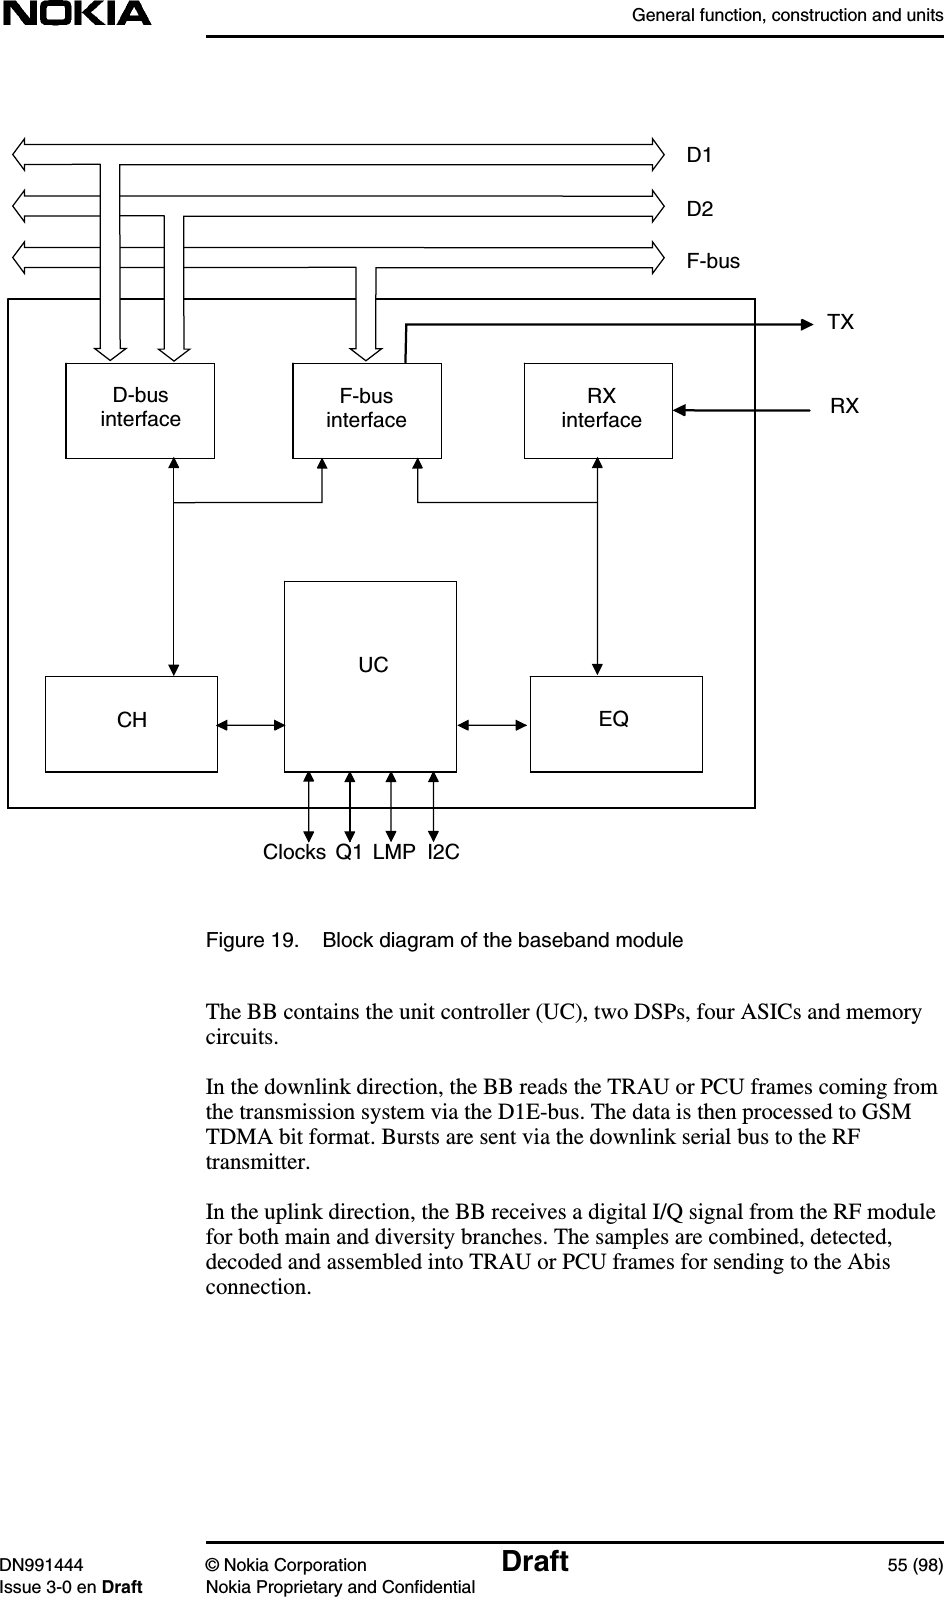 General function, construction and unitsDN991444 © Nokia Corporation Draft 55 (98)Issue 3-0 en Draft Nokia Proprietary and ConfidentialFigure 19. Block diagram of the baseband moduleThe BB contains the unit controller (UC), two DSPs, four ASICs and memorycircuits.In the downlink direction, the BB reads the TRAU or PCU frames coming fromthe transmission system via the D1E-bus. The data is then processed to GSMTDMA bit format. Bursts are sent via the downlink serial bus to the RFtransmitter.In the uplink direction, the BB receives a digital I/Q signal from the RF modulefor both main and diversity branches. The samples are combined, detected,decoded and assembled into TRAU or PCU frames for sending to the Abisconnection.D-businterface RXTXF-businterfaceD1RXinterfaceD2F-busI2CLMPQ1ClocksCHUCEQ